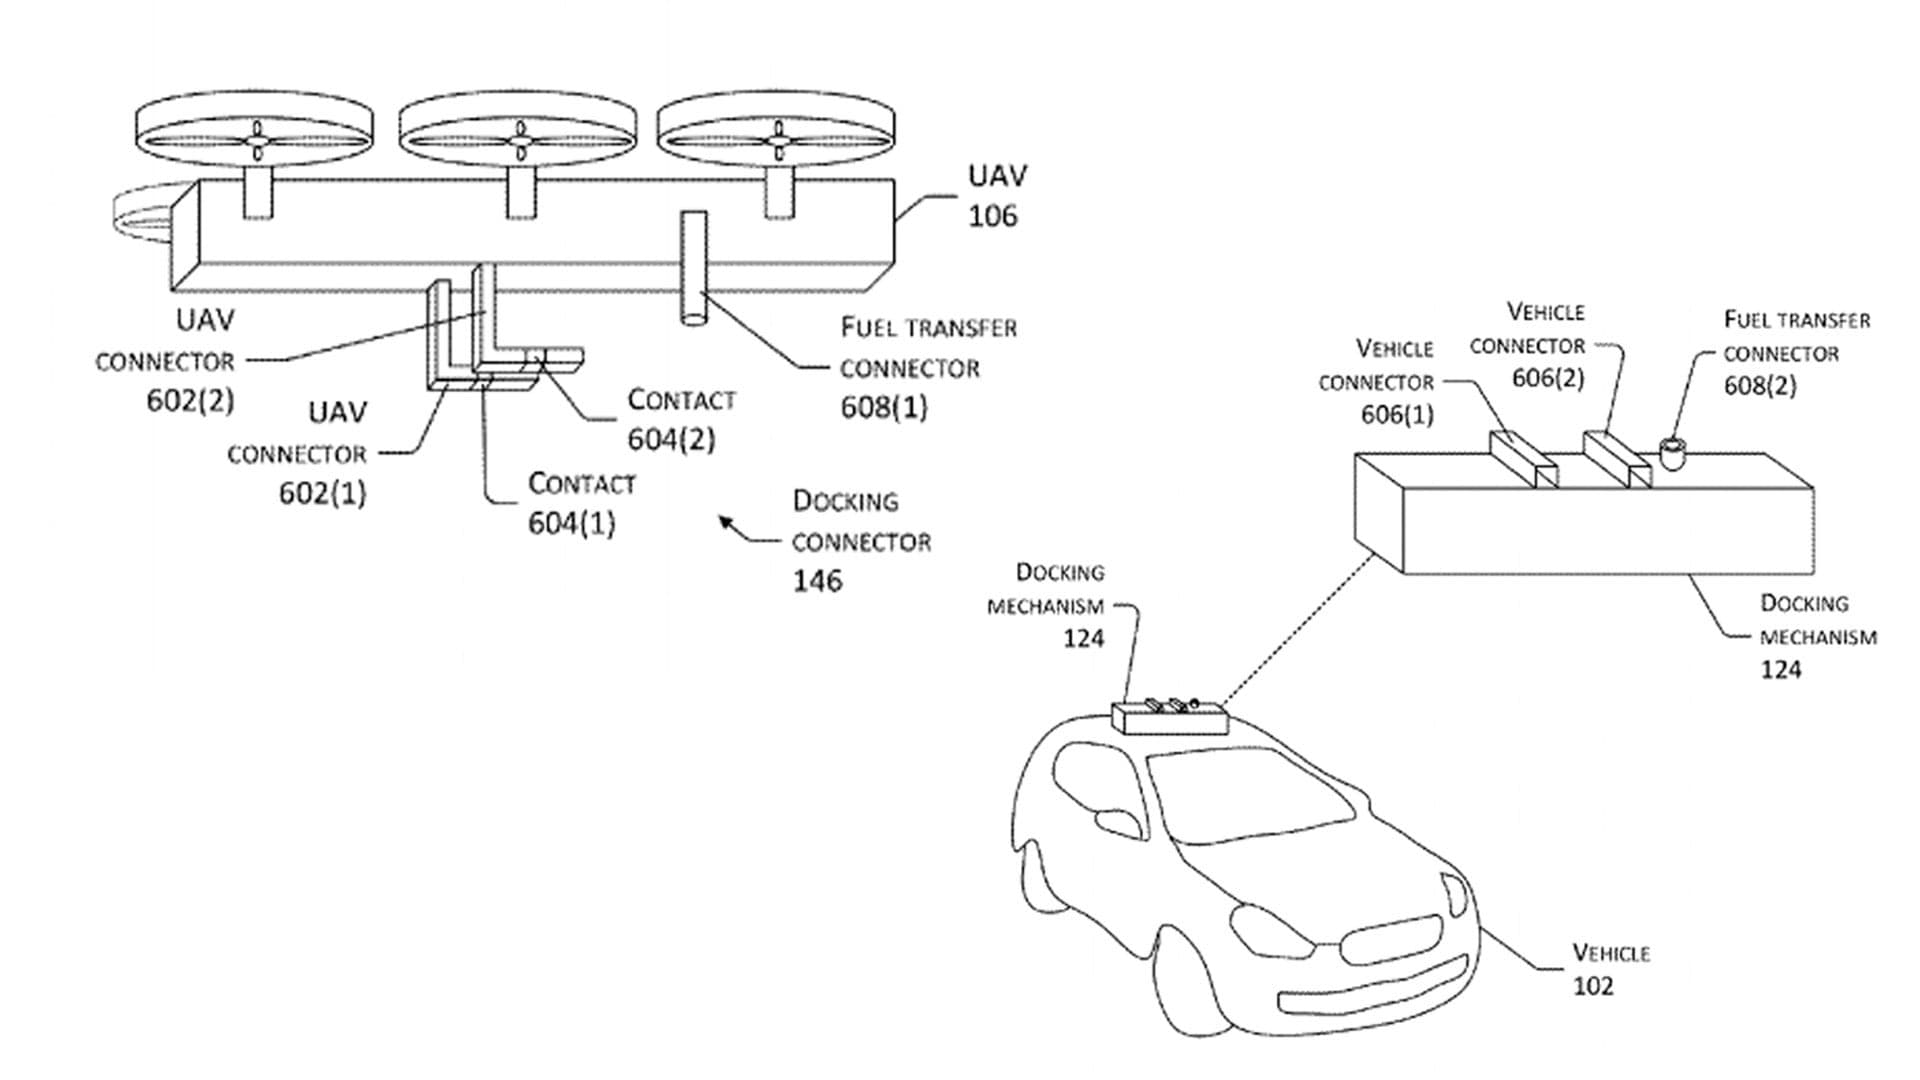 Amazon Patents Drone to Recharge Electric Cars While Driving